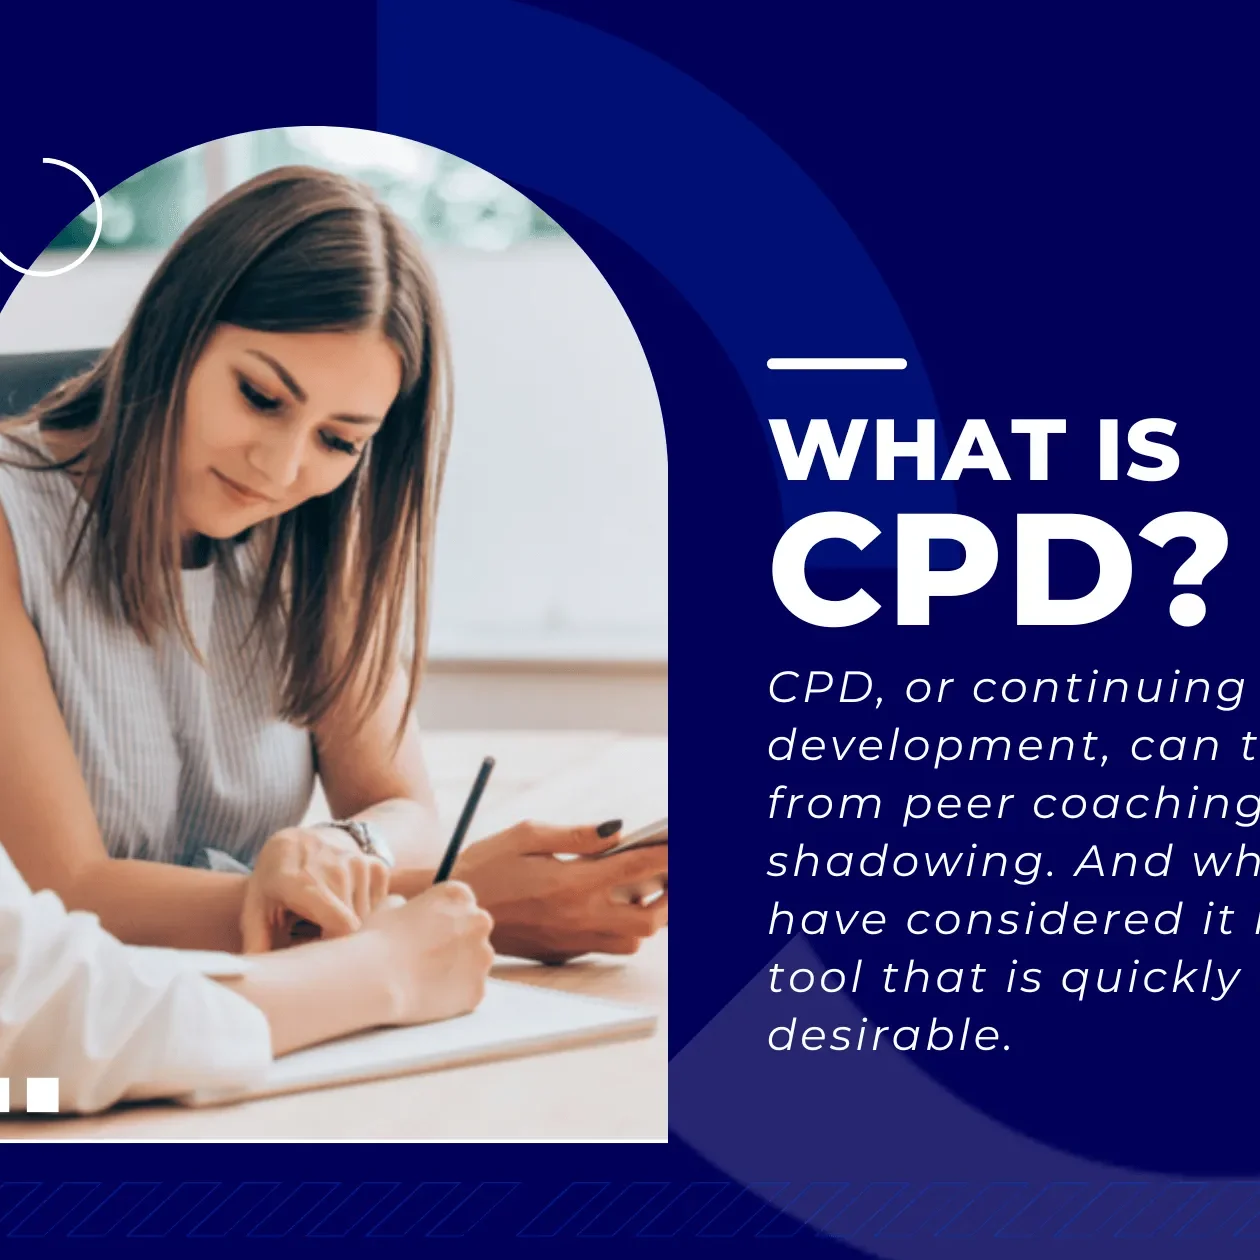 What is CPD, and why is it important?